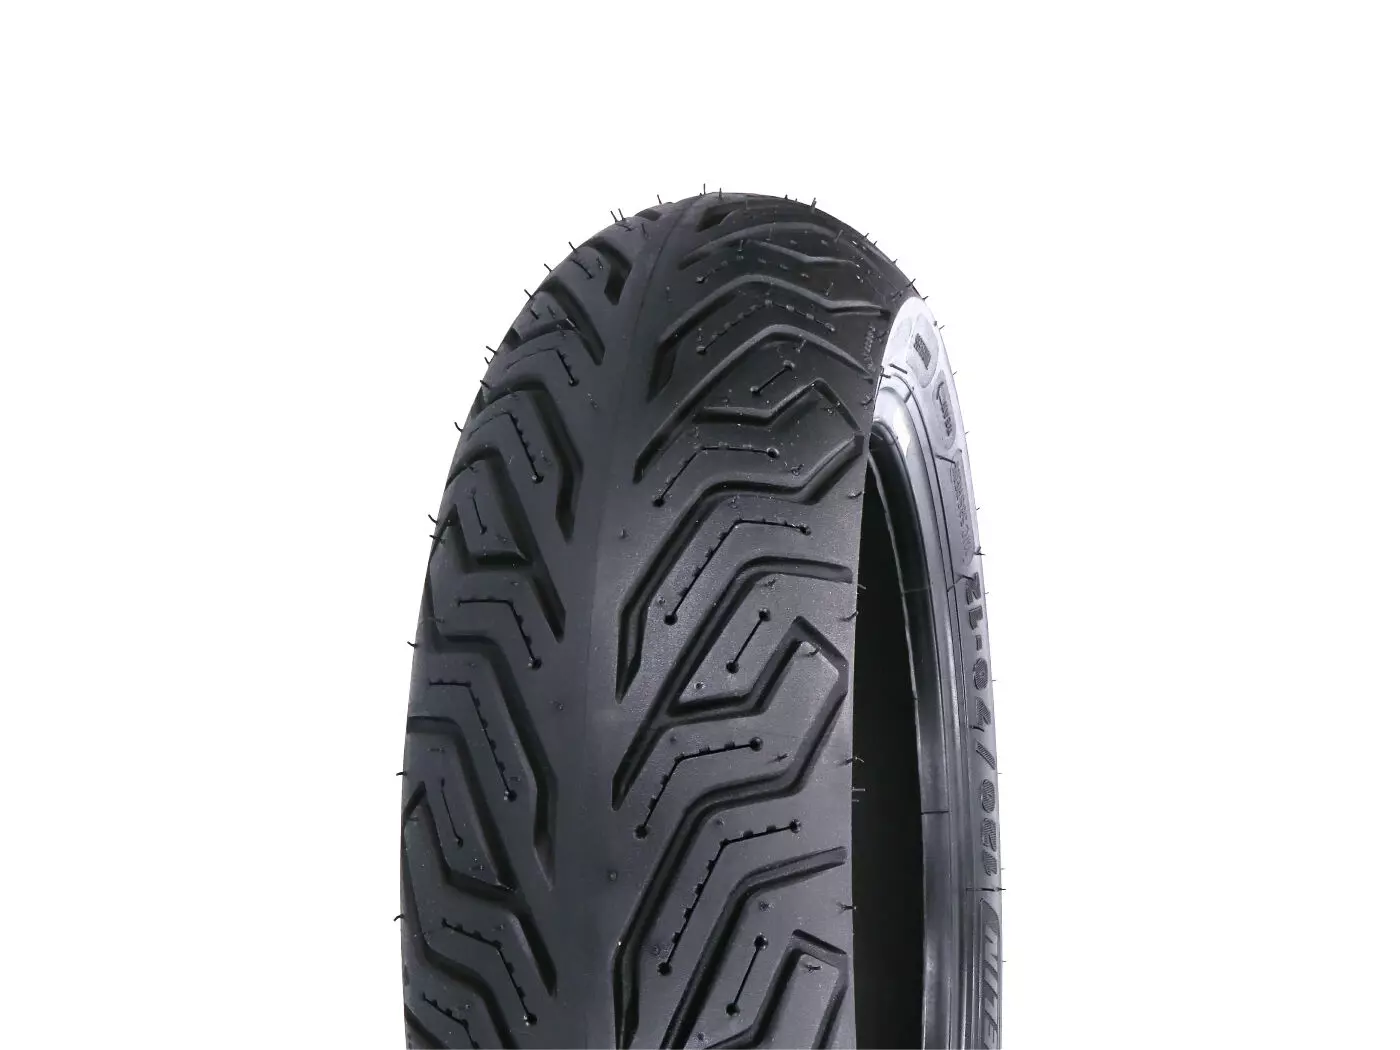 Band Michelin City Grip 2 M+S 130/70-13 63S TL